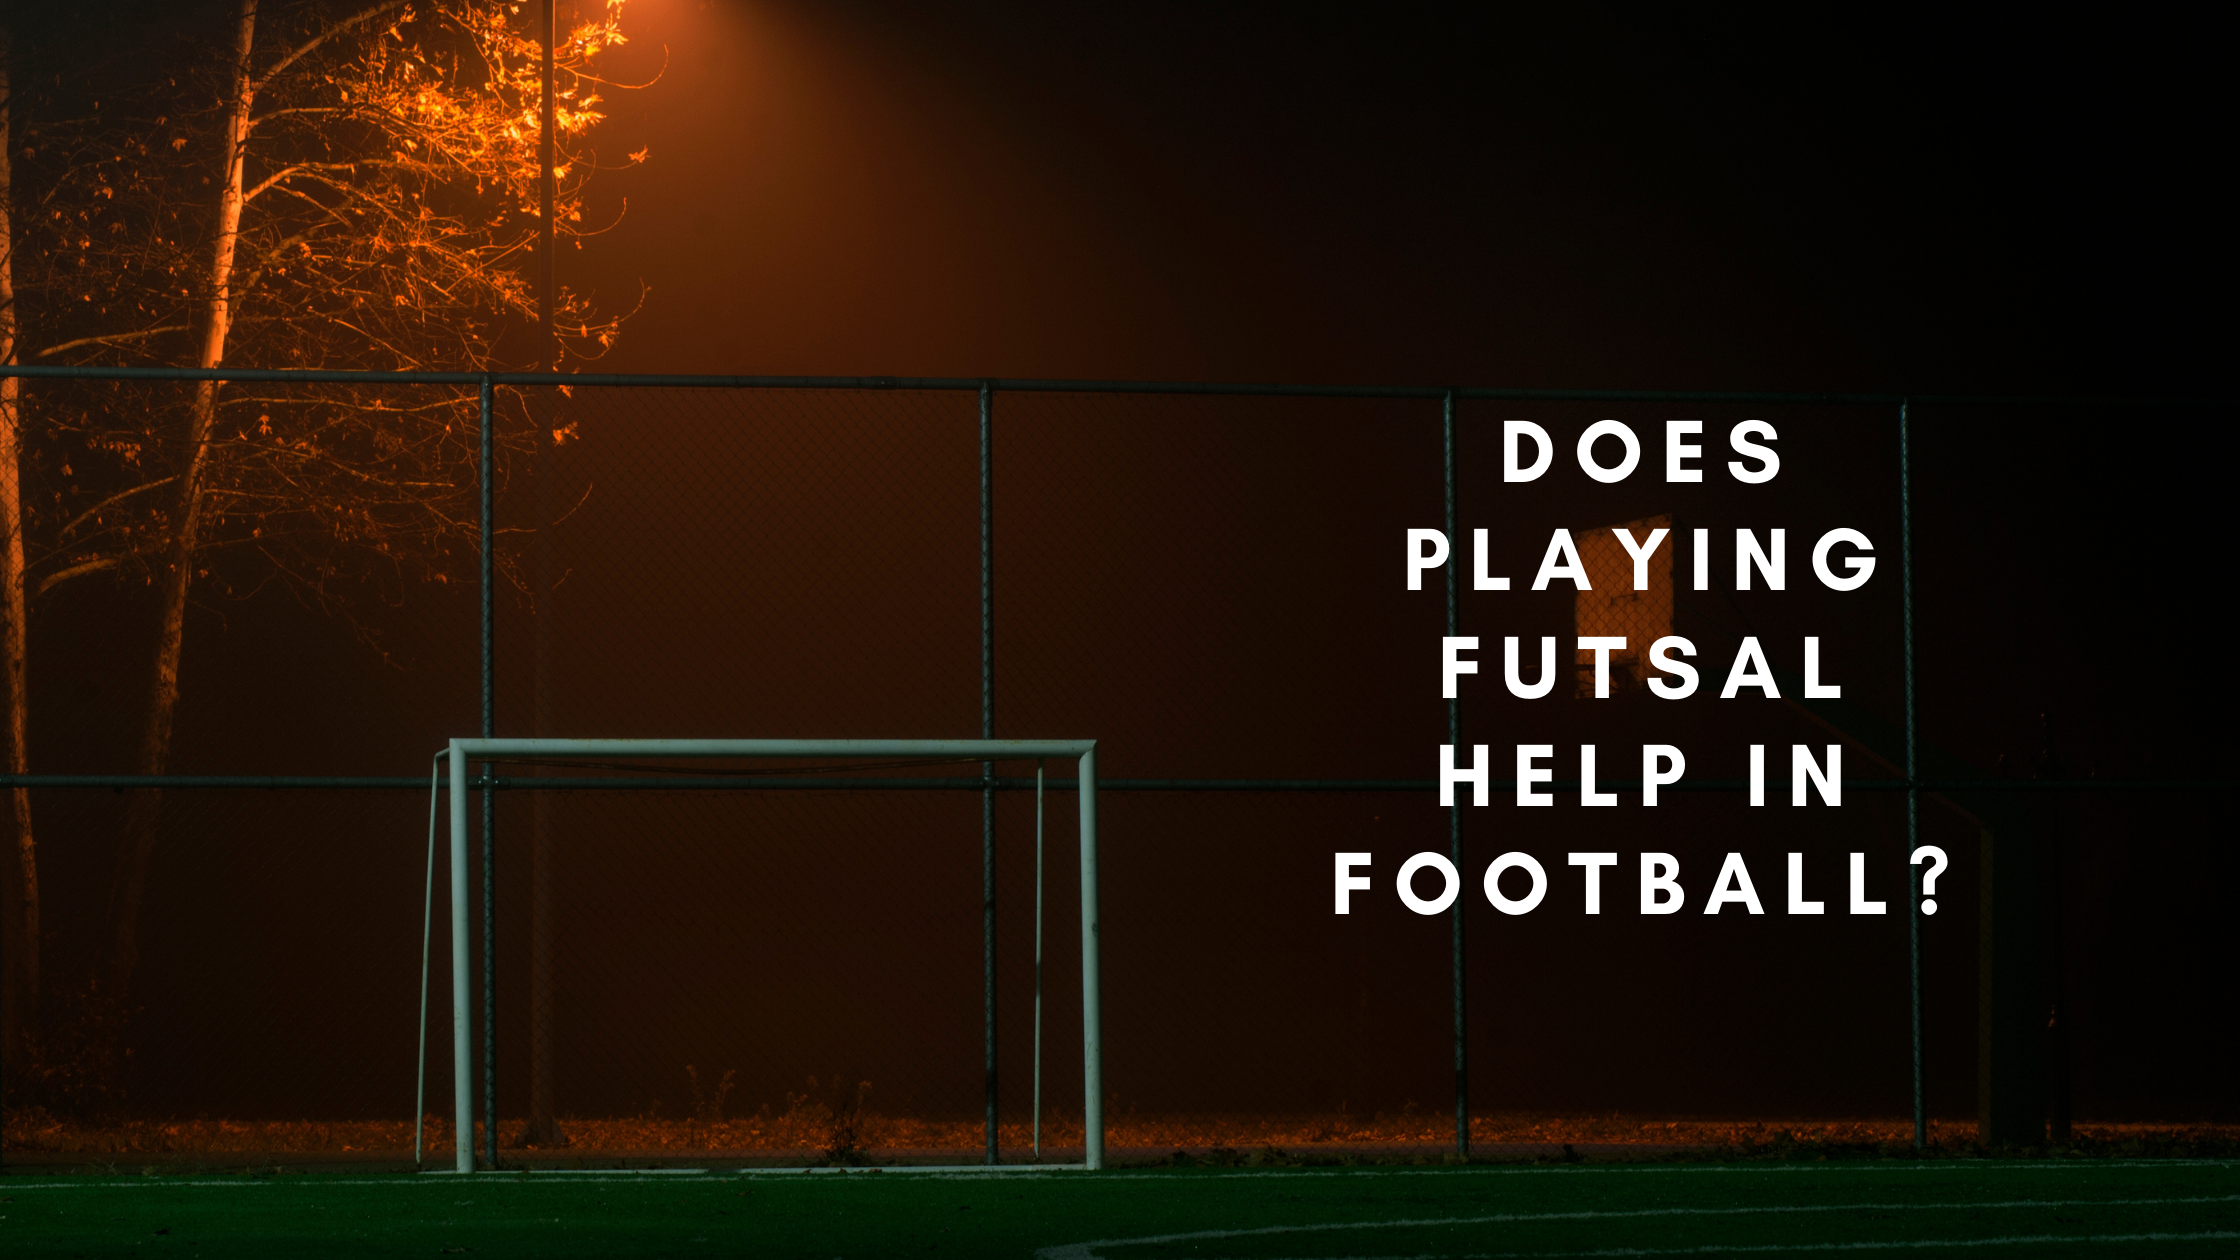 Does Playing Futsal Help You in Football? - BALLERSITE